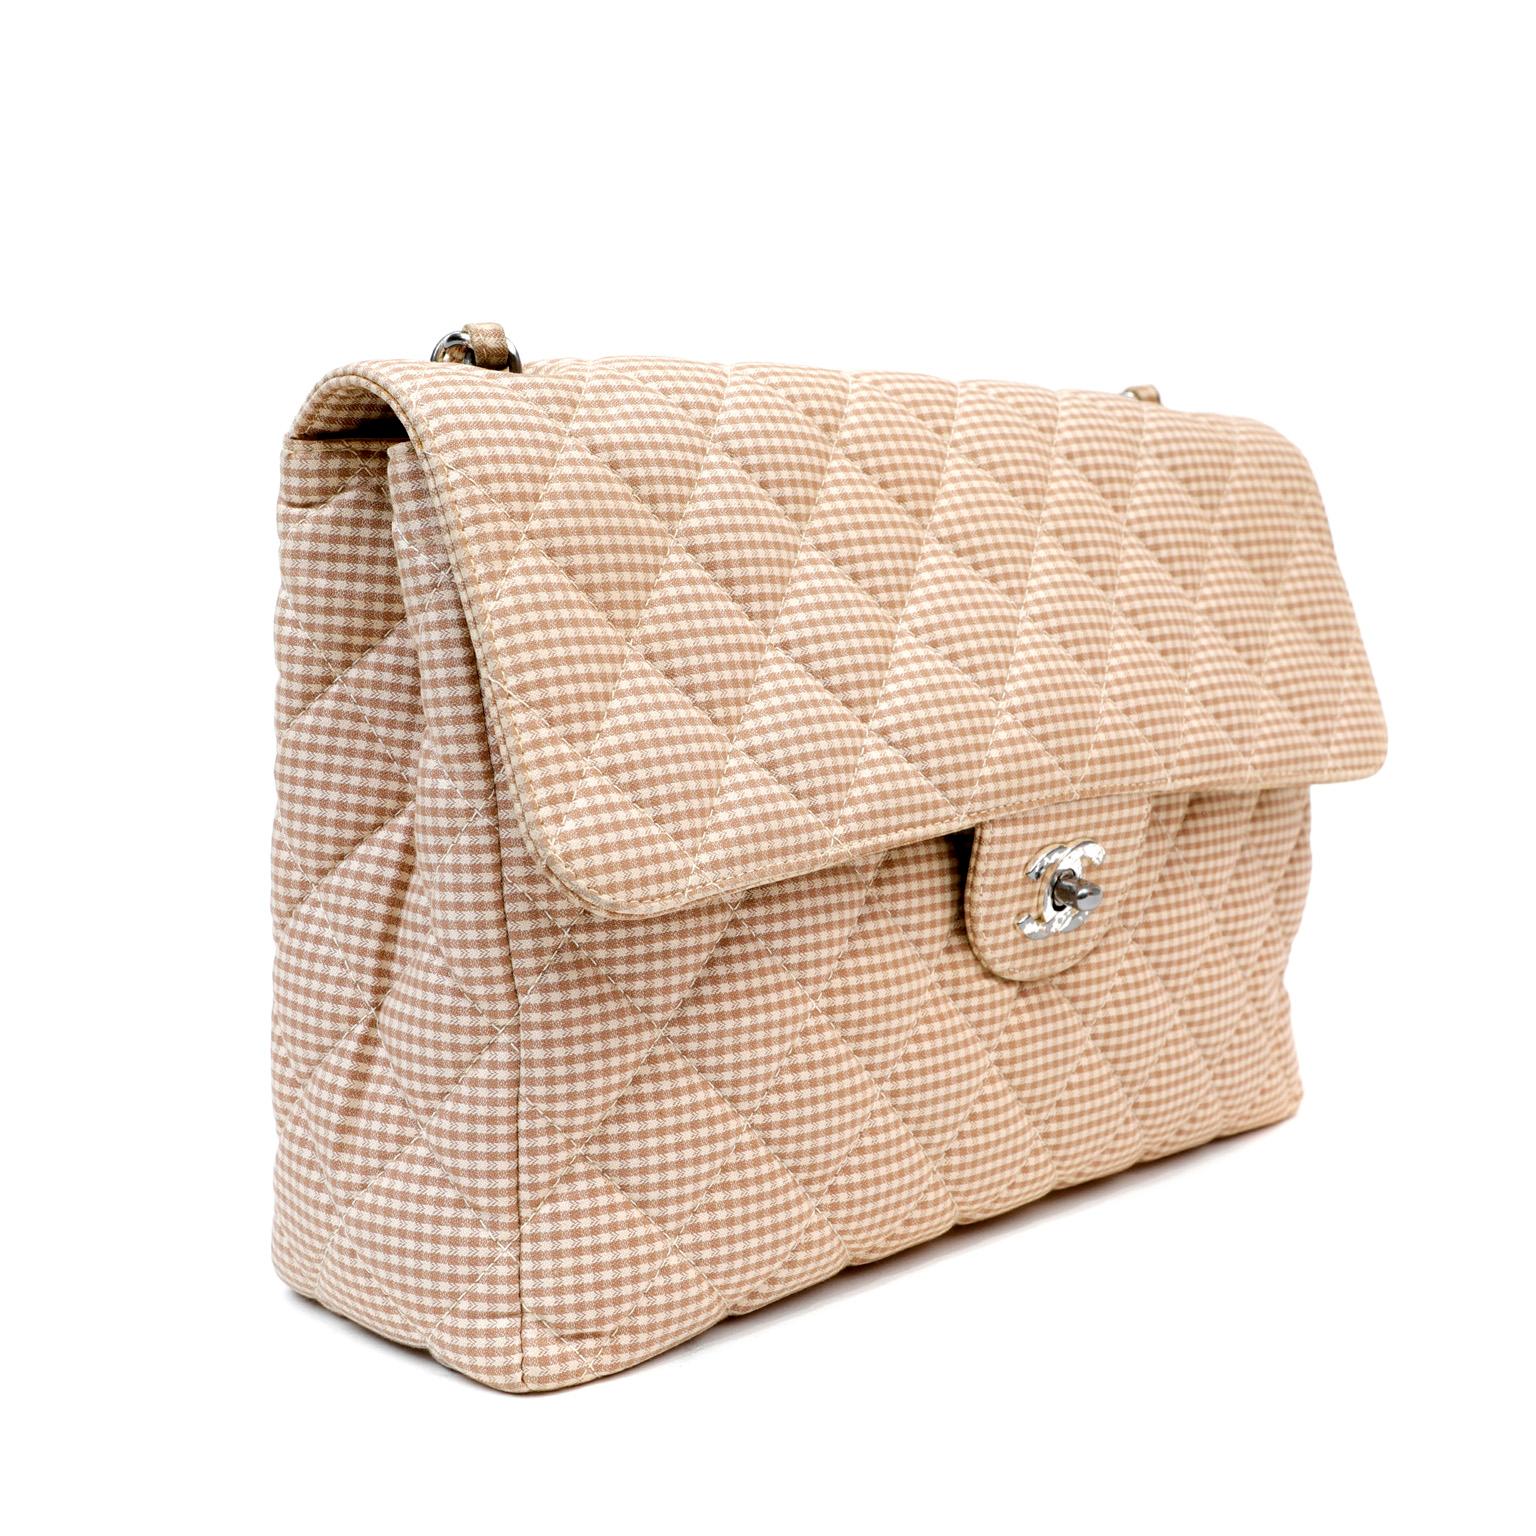 This authentic Chanel Gingham Fabric Maxi Flap Bag is in good previously owned condition.  Very unique and collectible style.  Tan ad cream gingham check fabric is quilted in signature Chanel diamond pattern.  Silver tone interlocking CC twist lock